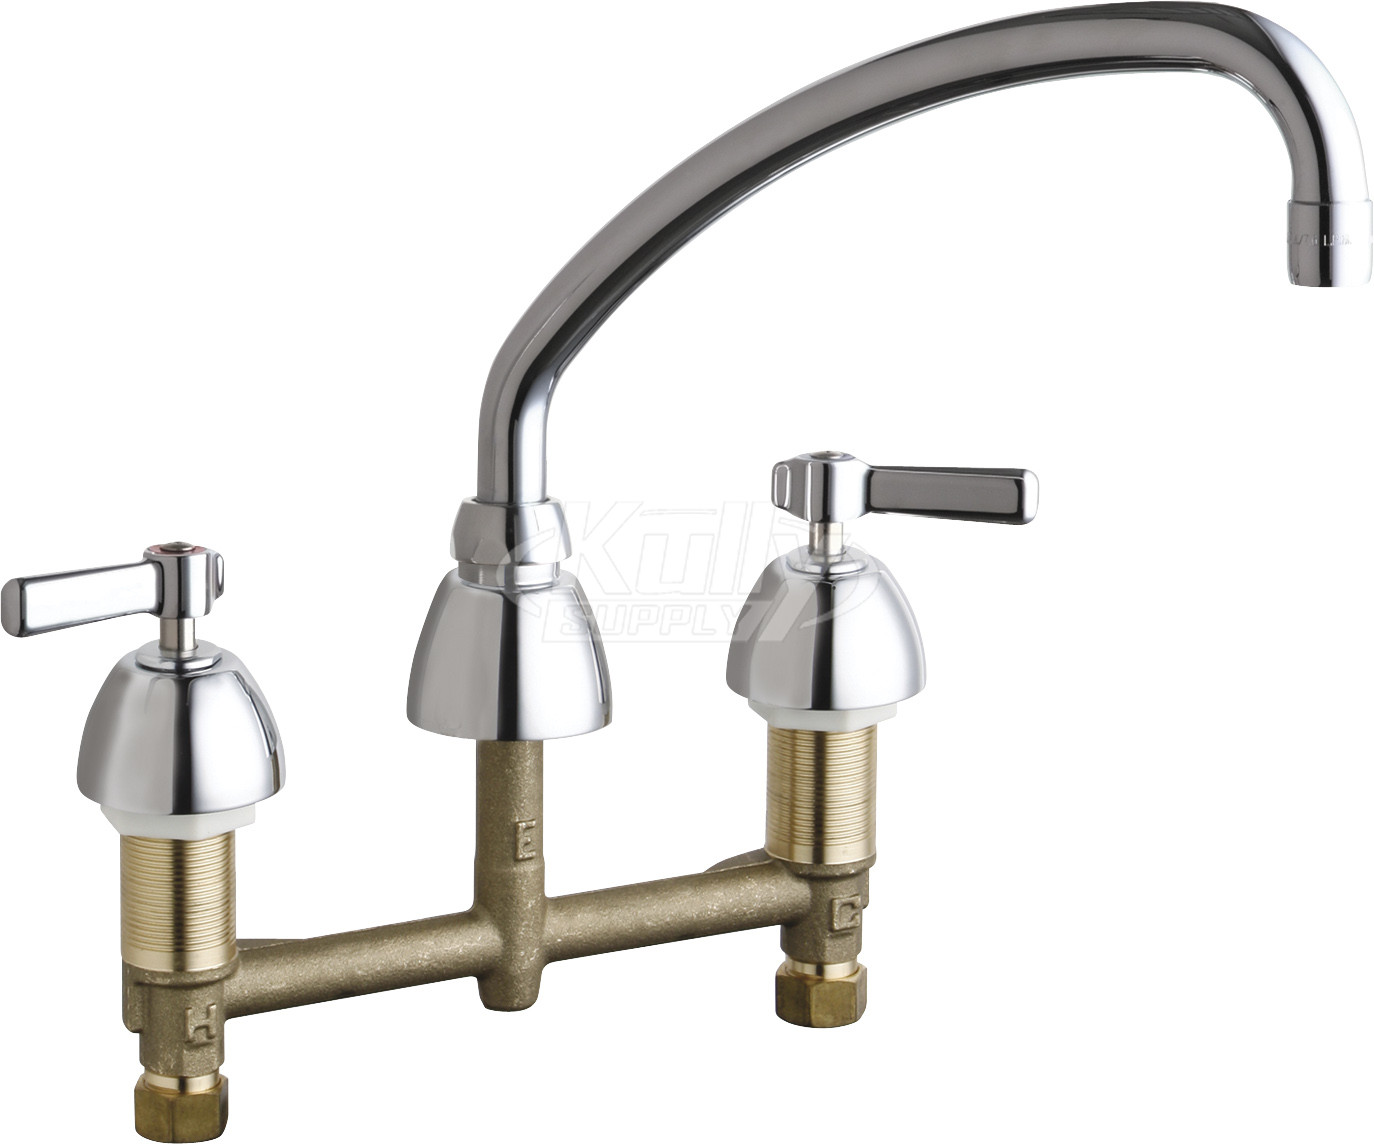 Chicago 201-AABCP Concealed Hot and Cold Water Sink Faucet